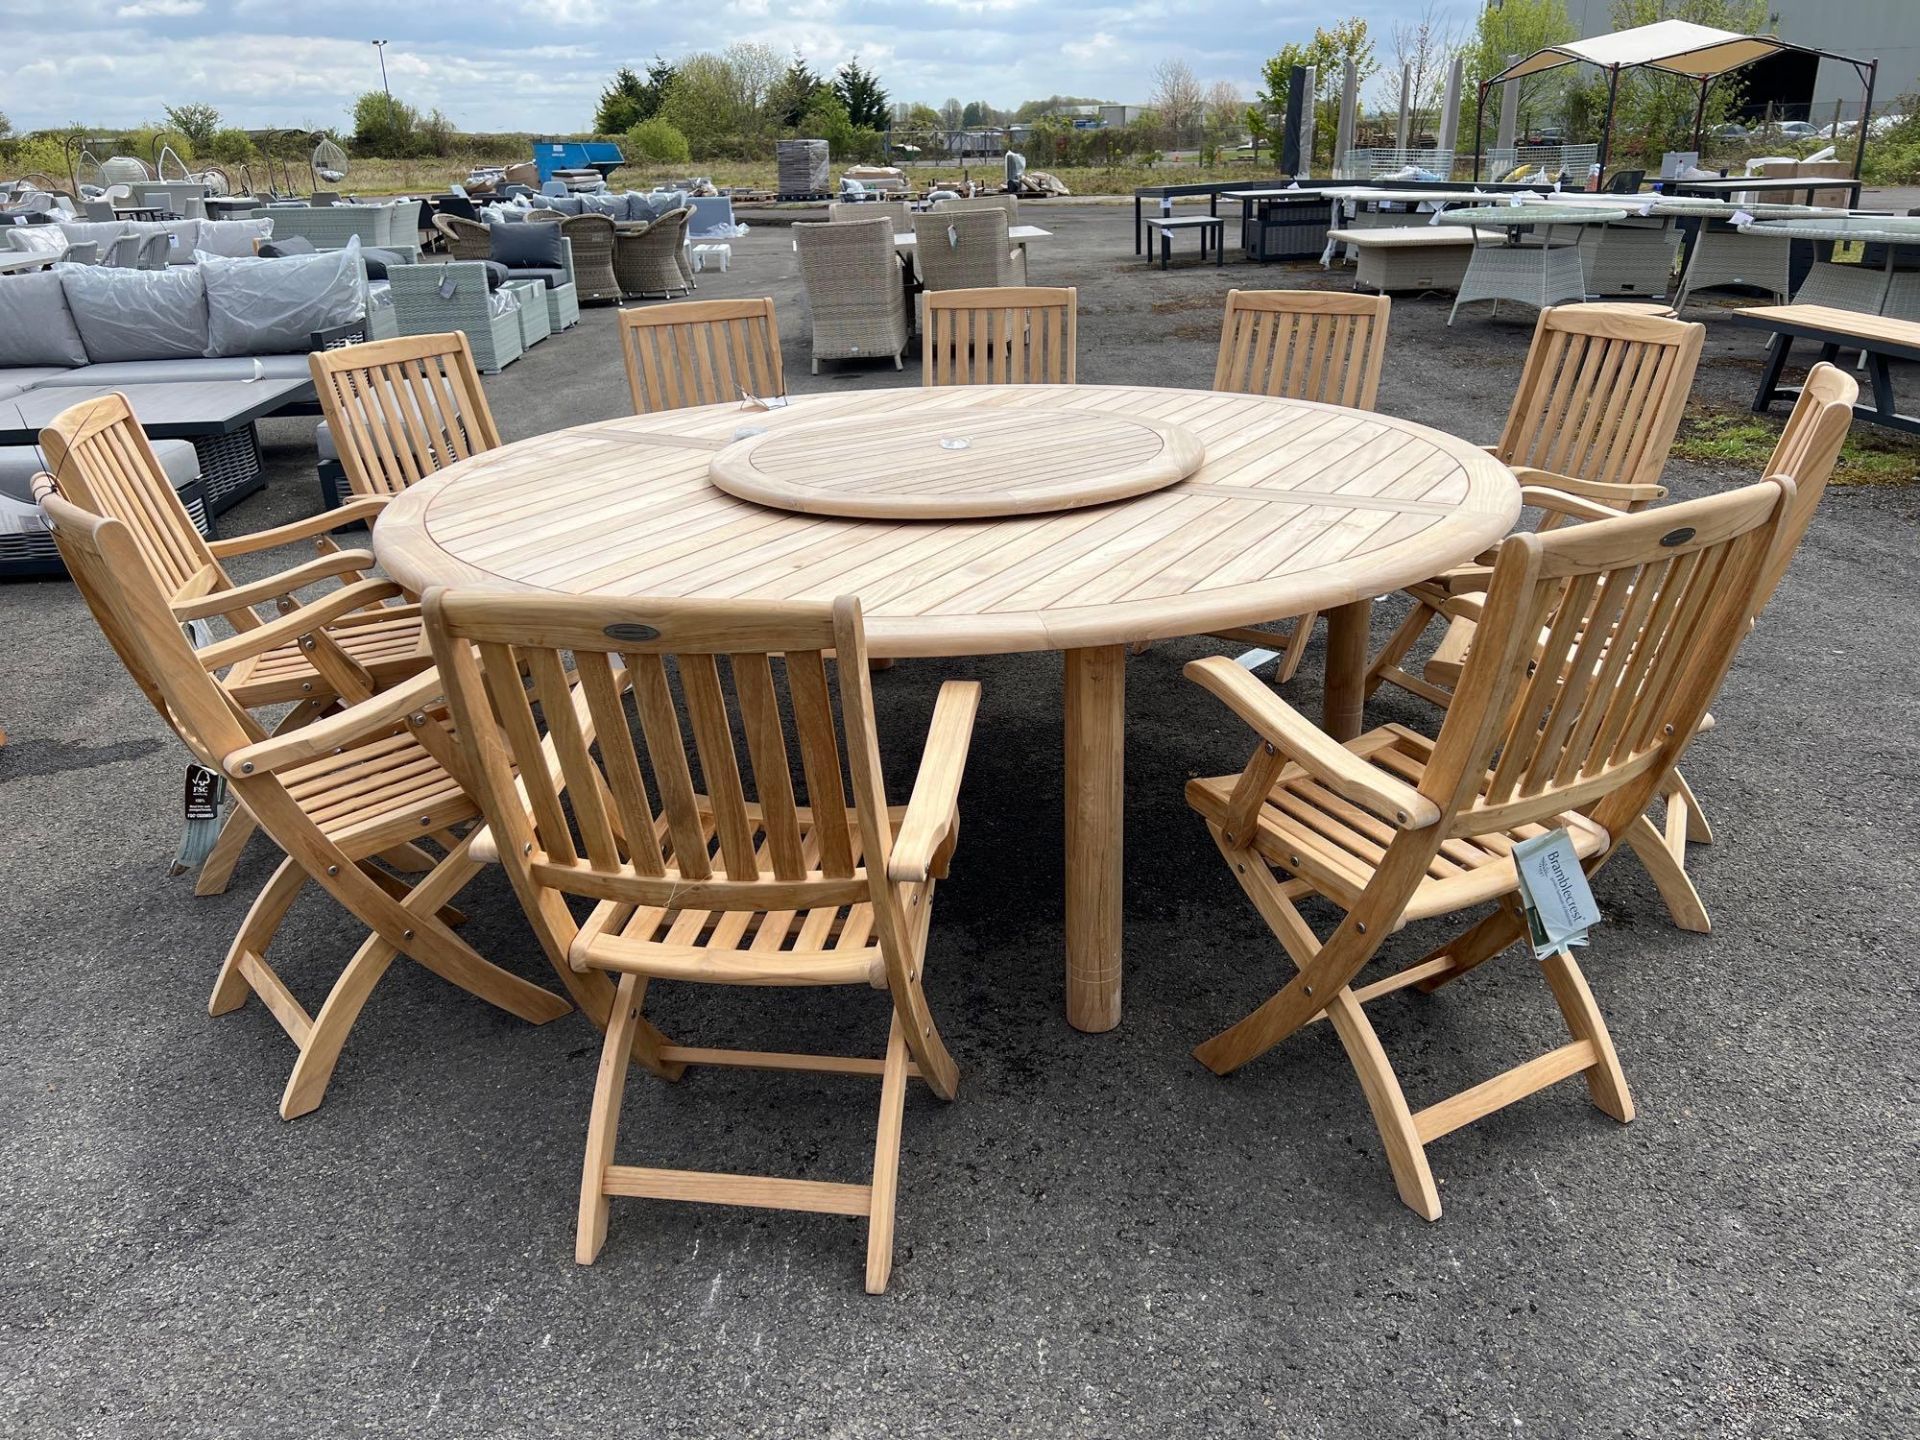 A103 Woodstock Teak Table With 10 x Beaufort Armchairs and Lazy Susan